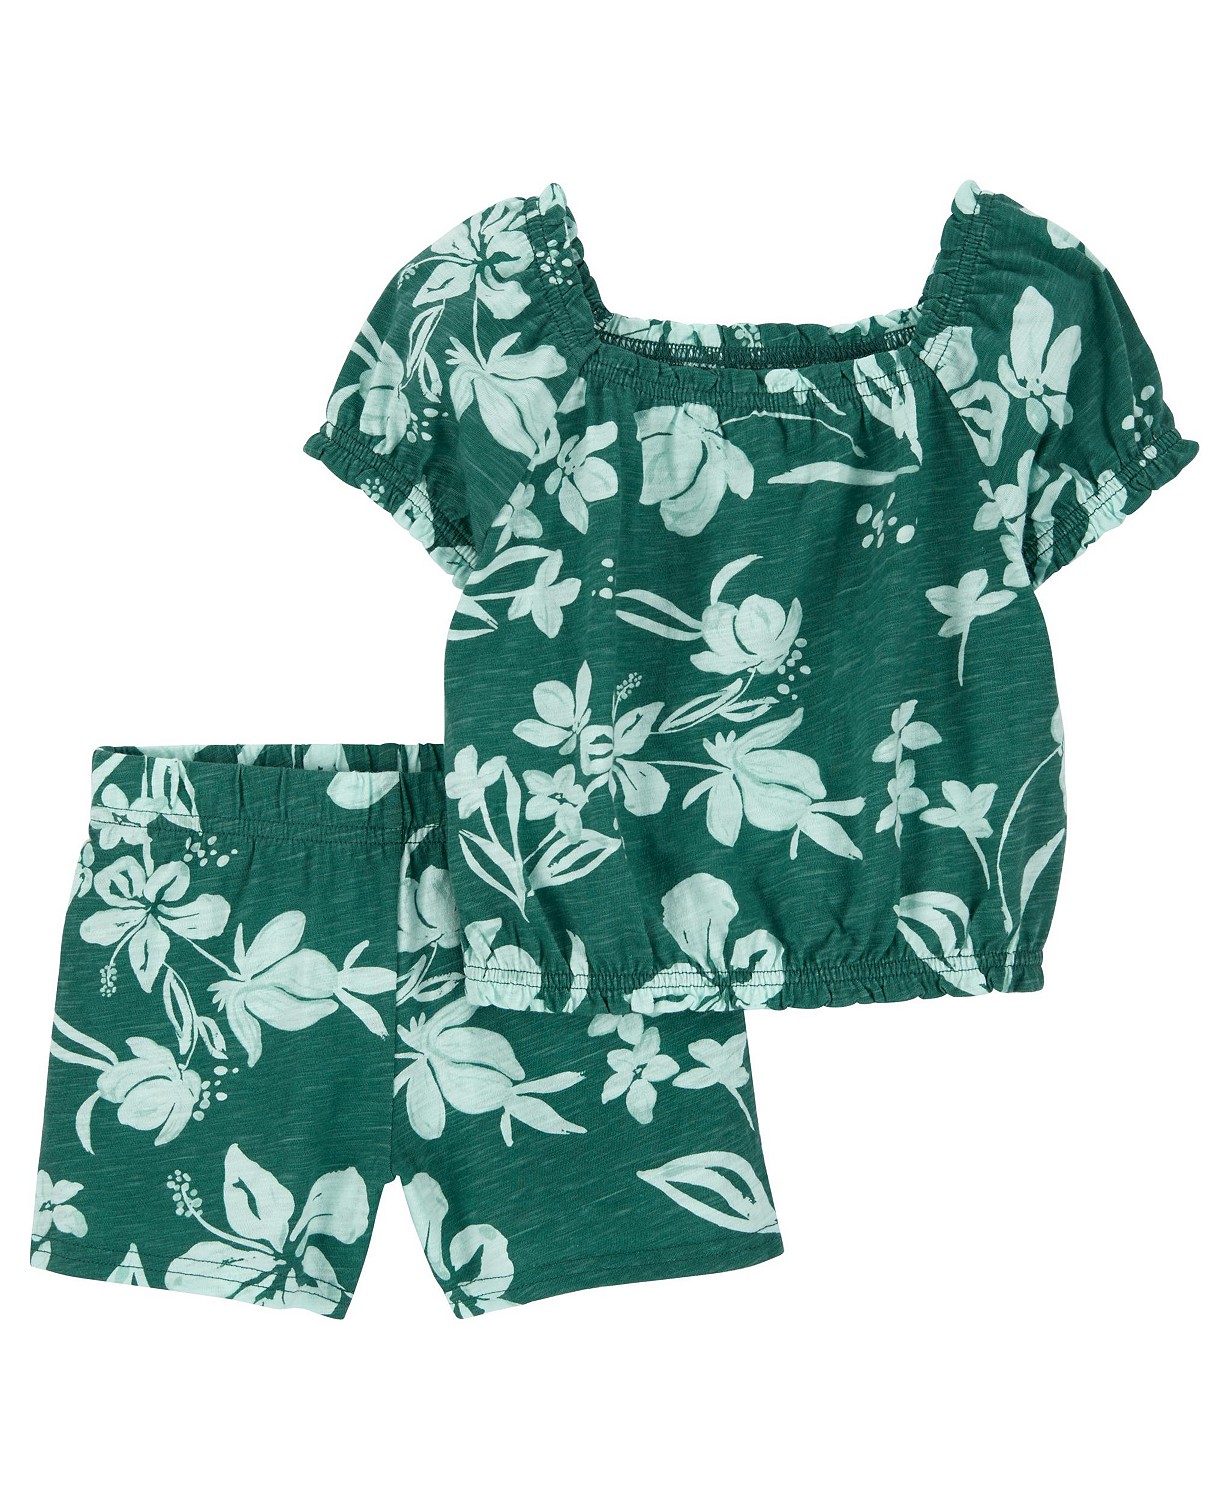 Baby Girls Floral Cotton Top and Shorts 2 Piece Set